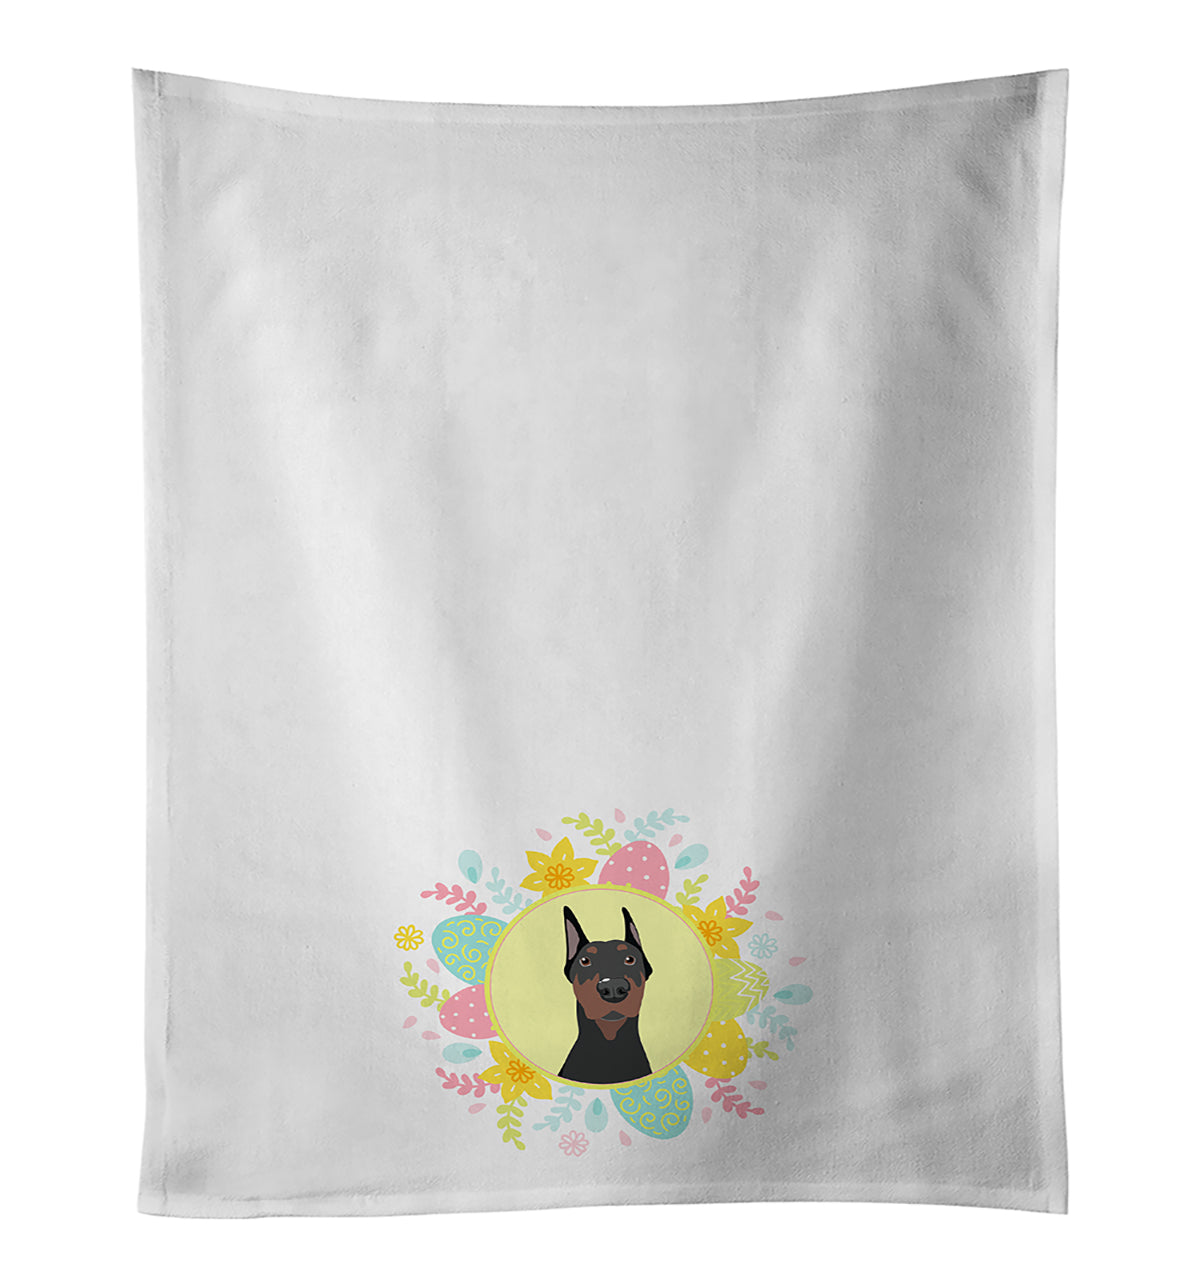 Buy this Doberman Pinscher Black Cropped Ears Easter White Kitchen Towel Set of 2